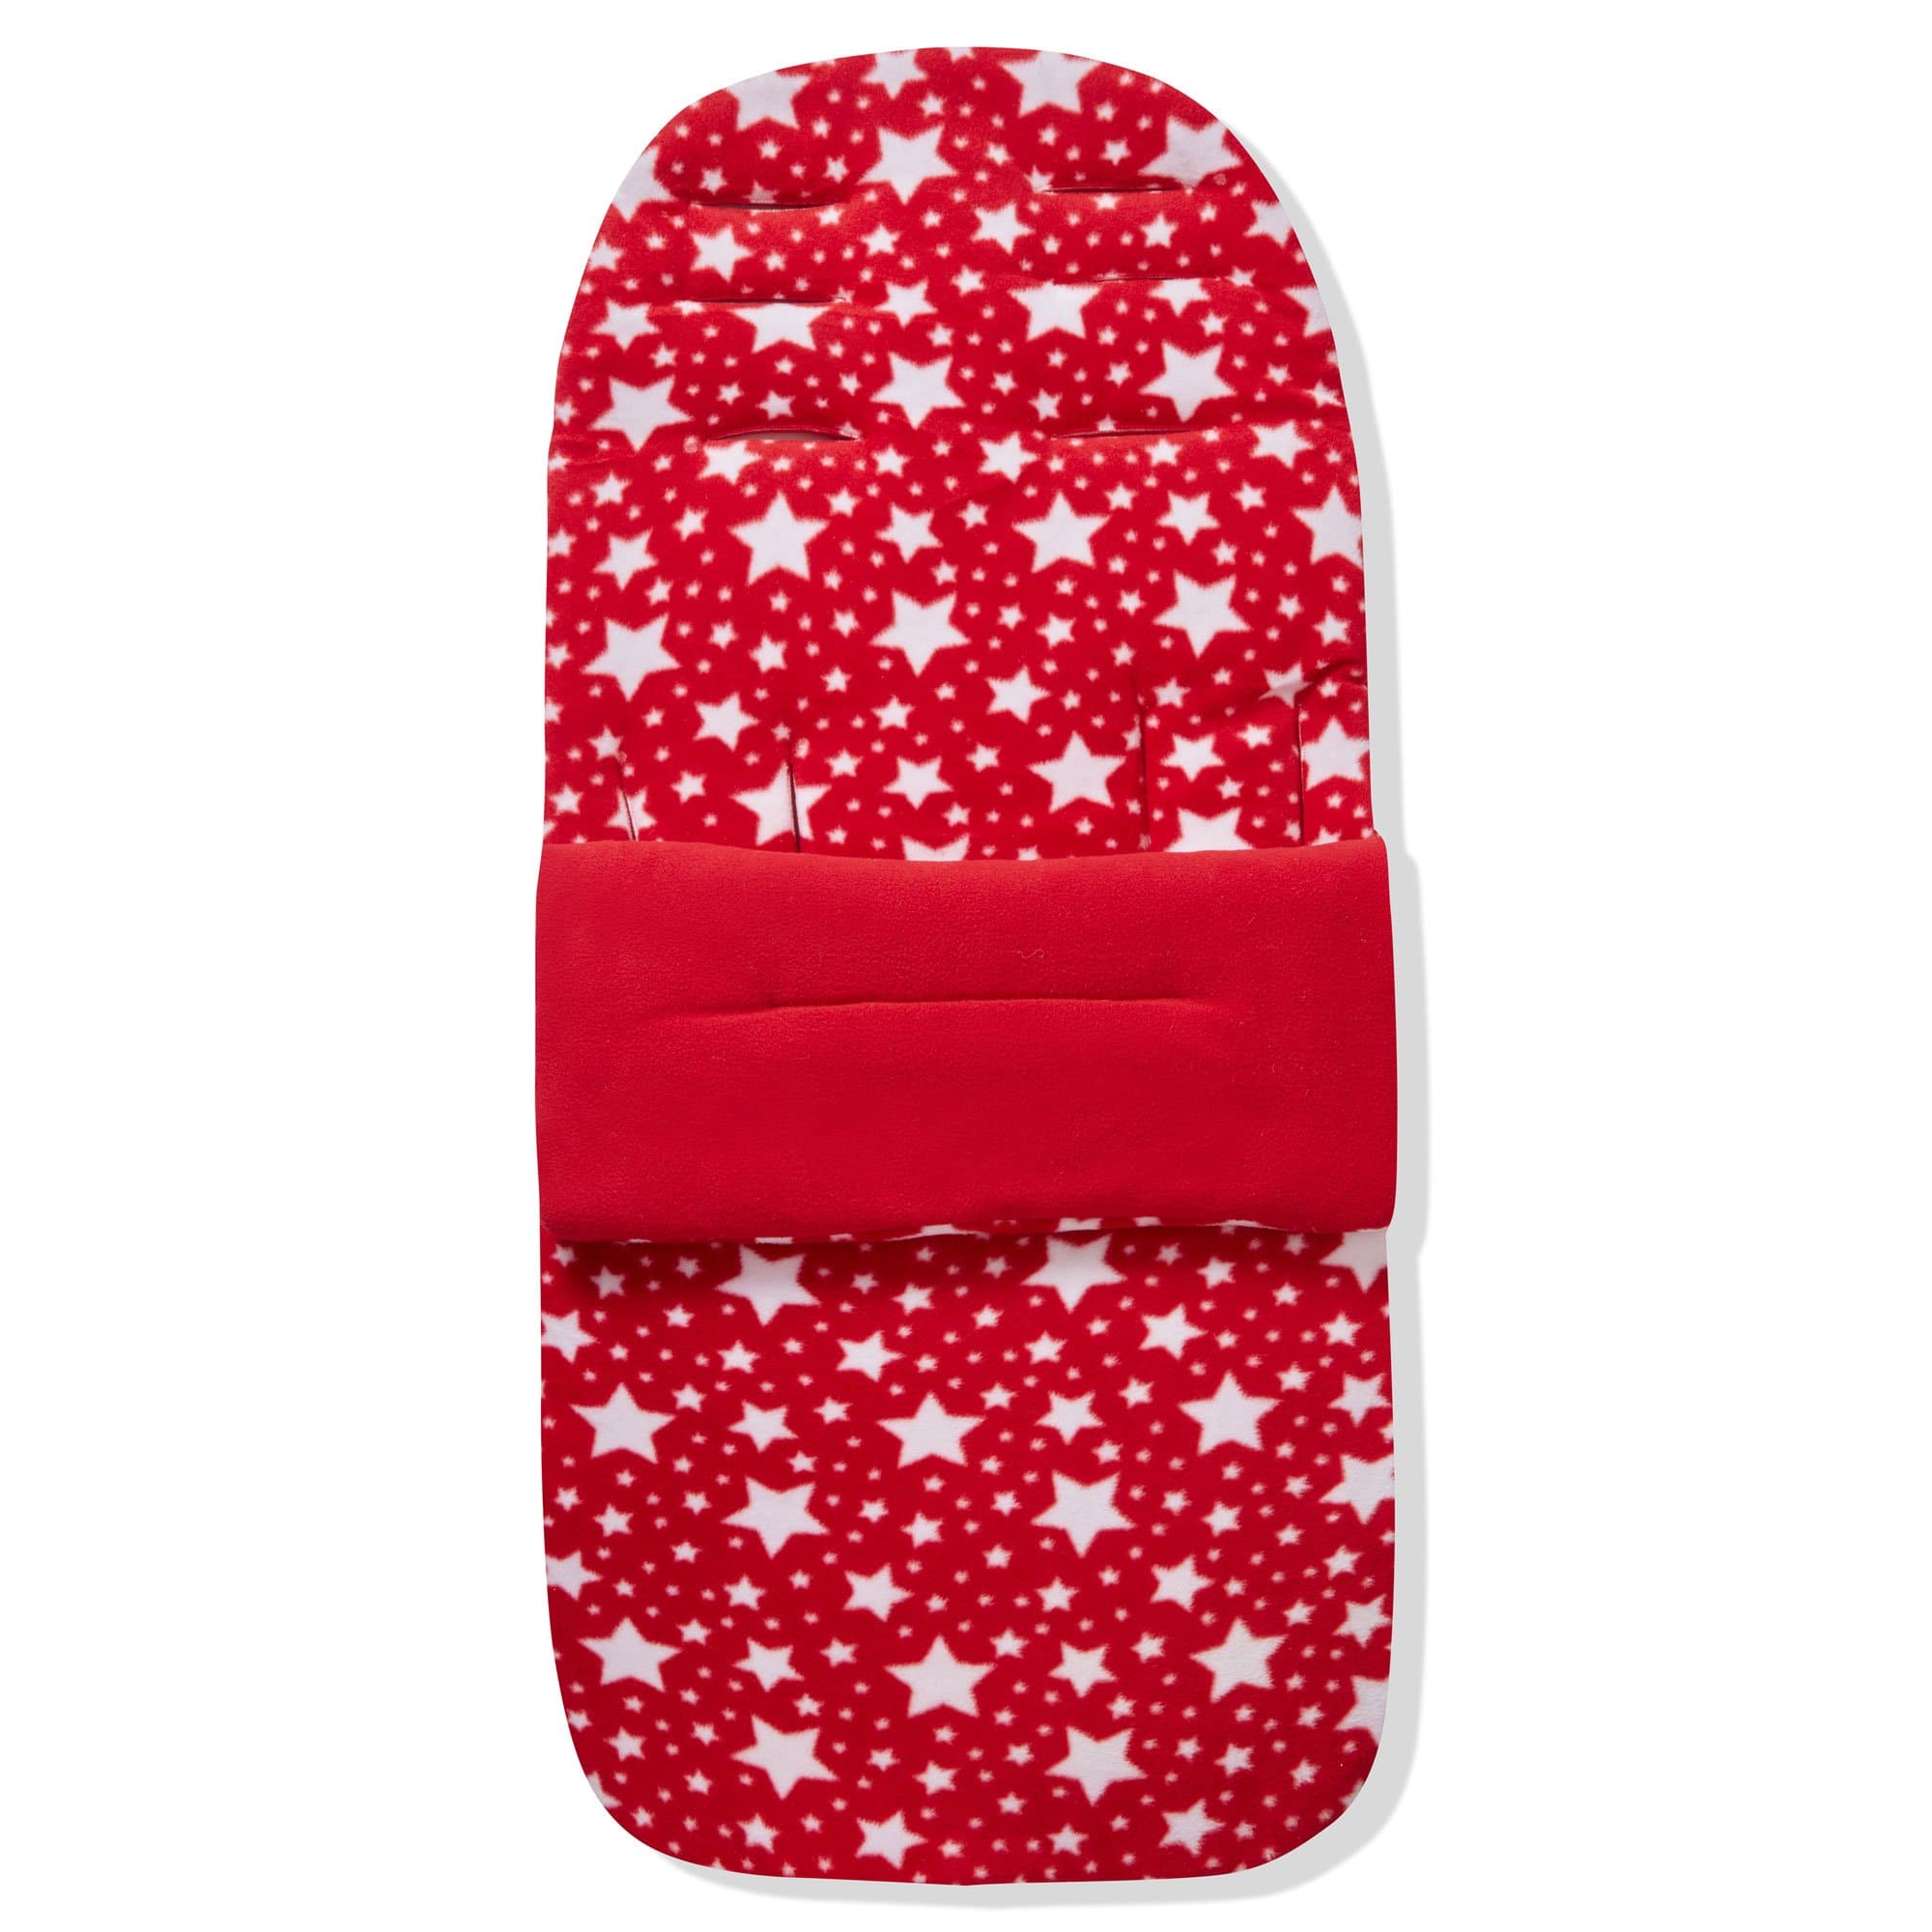 Fleece Footmuff / Cosy Toes Compatible with GB - Red Star / Fits All Models | For Your Little One